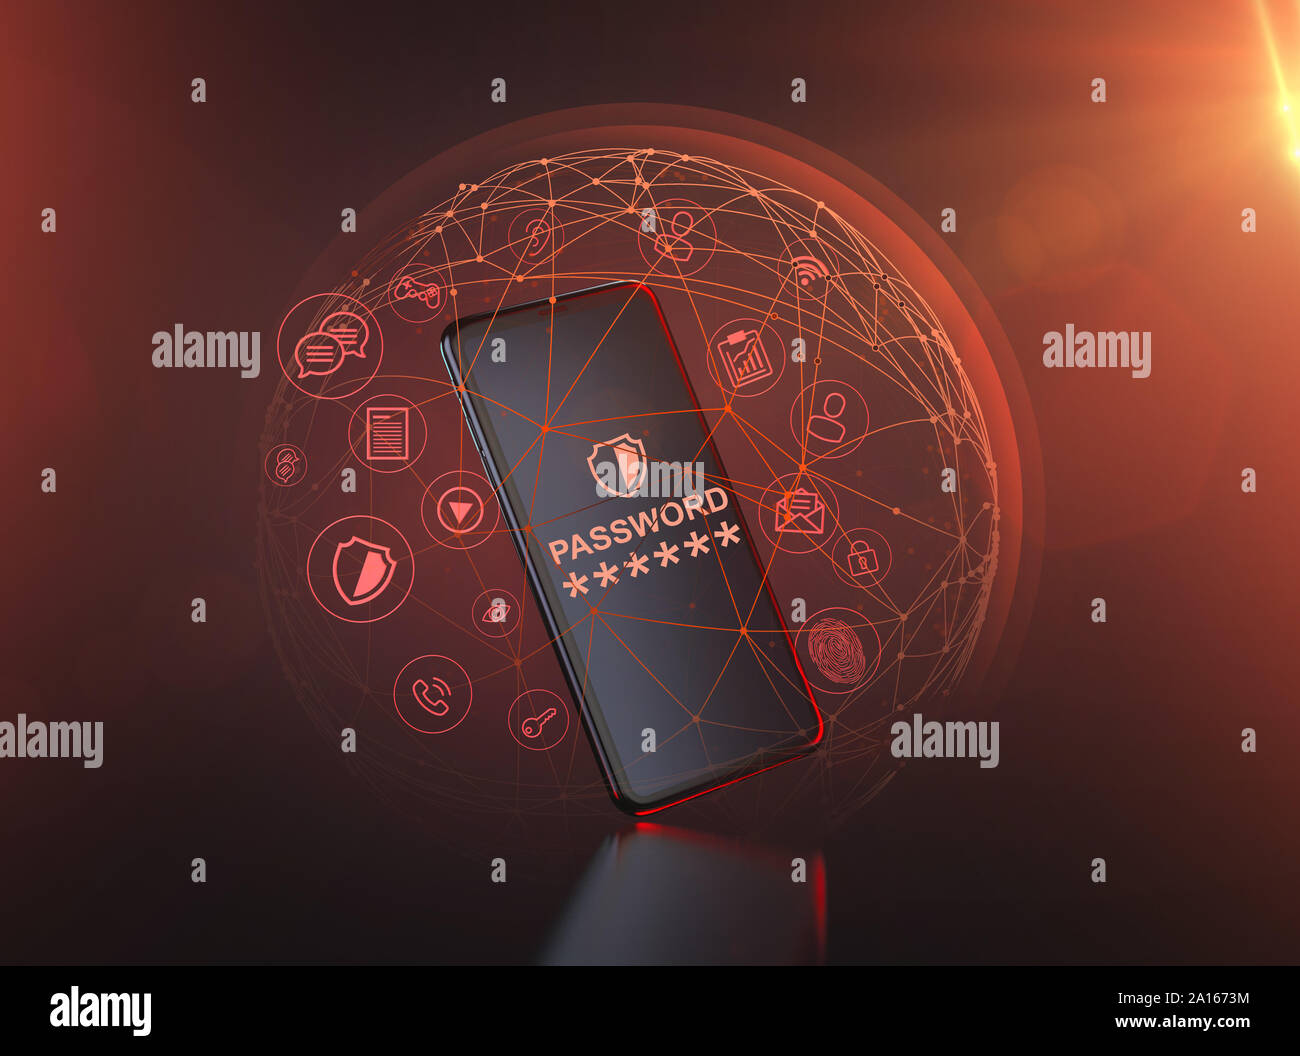 Smartphone surrounded by red nodes and protective force field. Attempted hacker attack - cyber security concept. 3D rendering Stock Photo